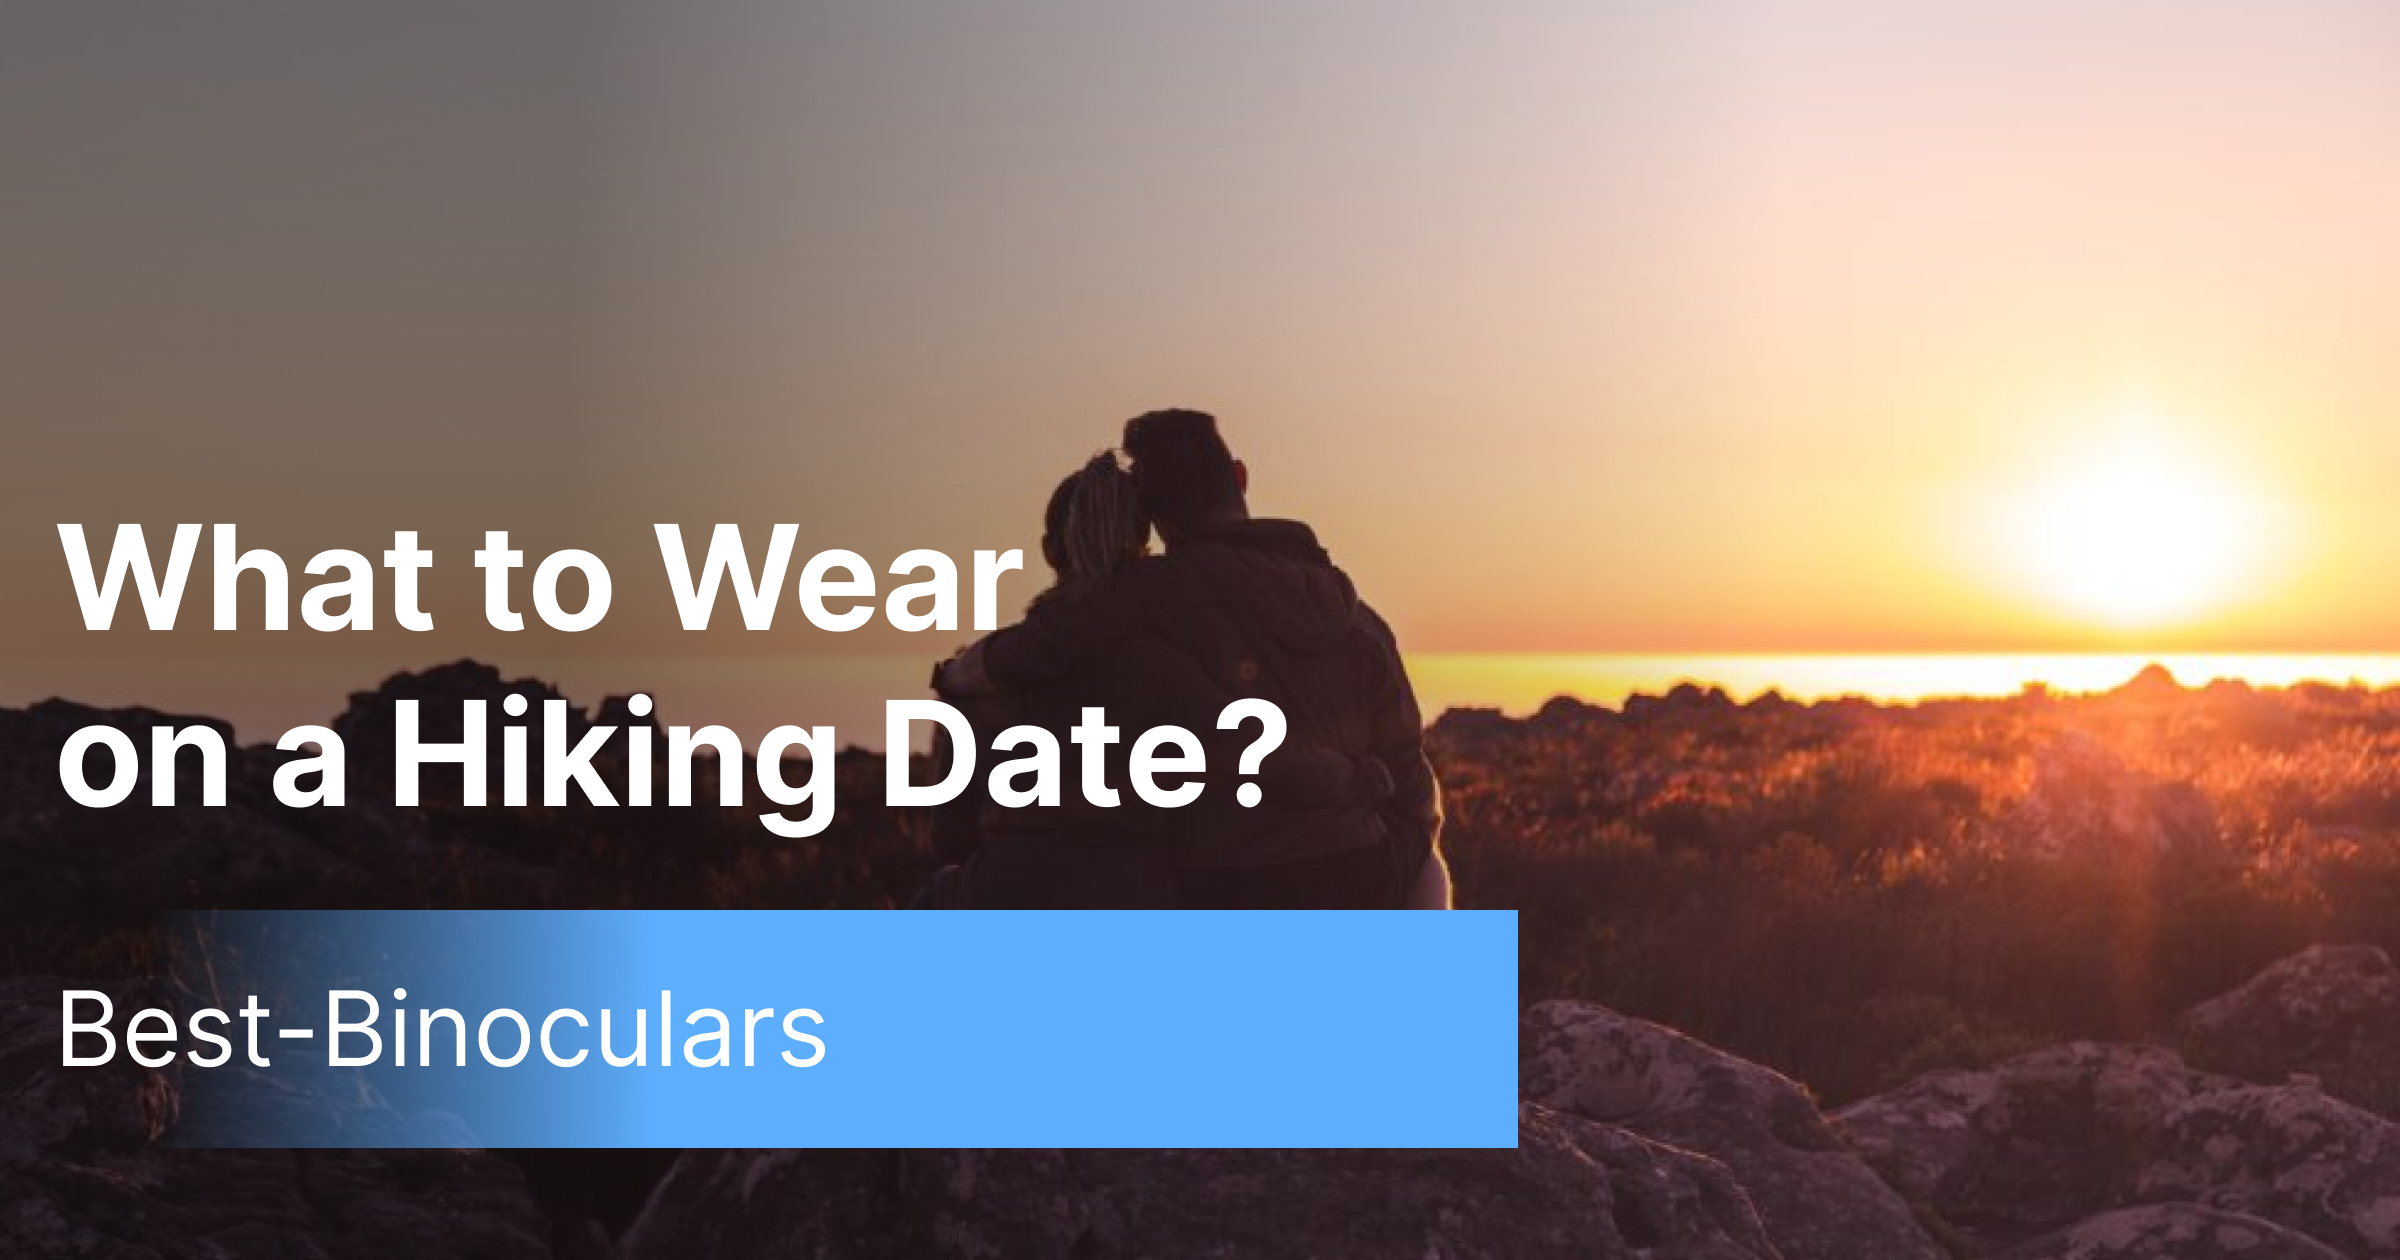 What to wear on a hiking date